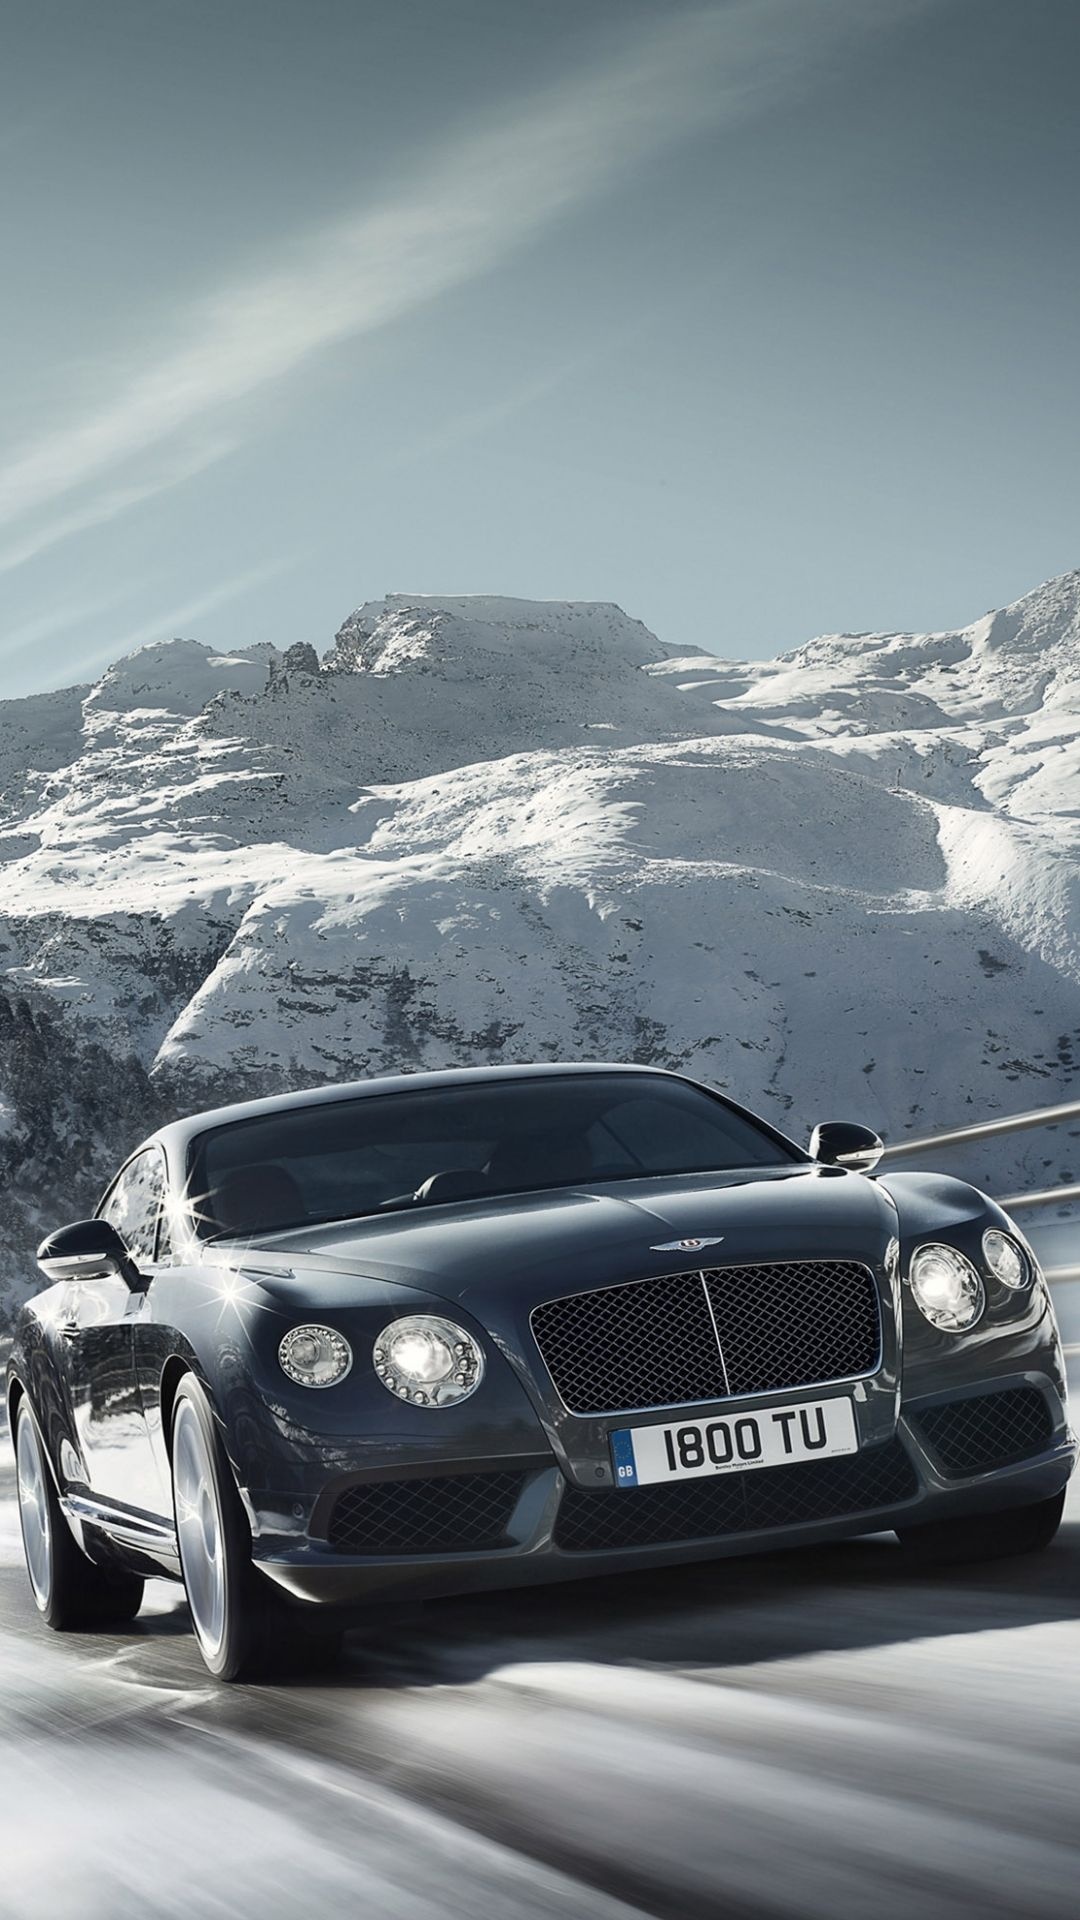 Bentley Continental, Bentley iPhone wallpapers, Elegance in your palm, Luxury at your fingertips, 1080x1920 Full HD Handy